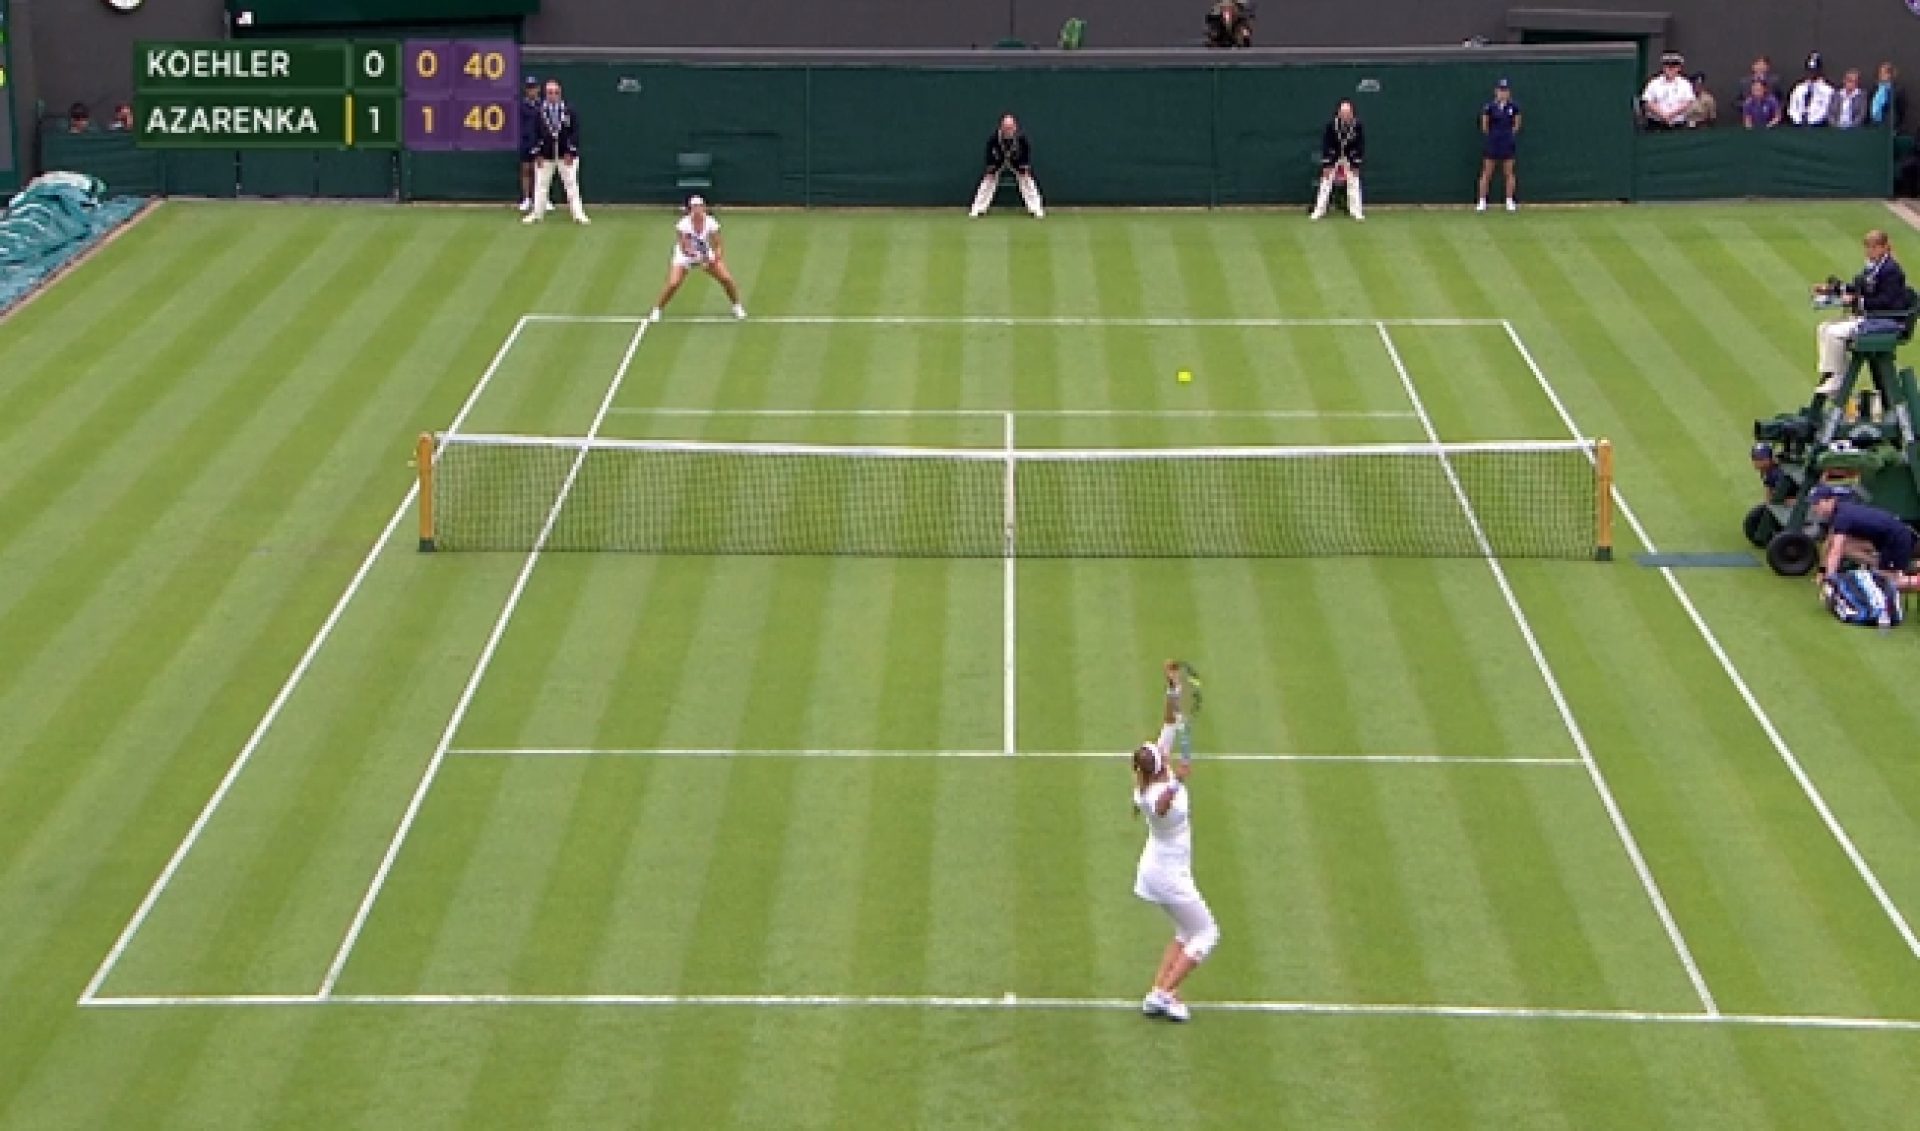 zebra Oven Actief YouTube Serves Up Live Streaming Tennis Matches From Wimbledon